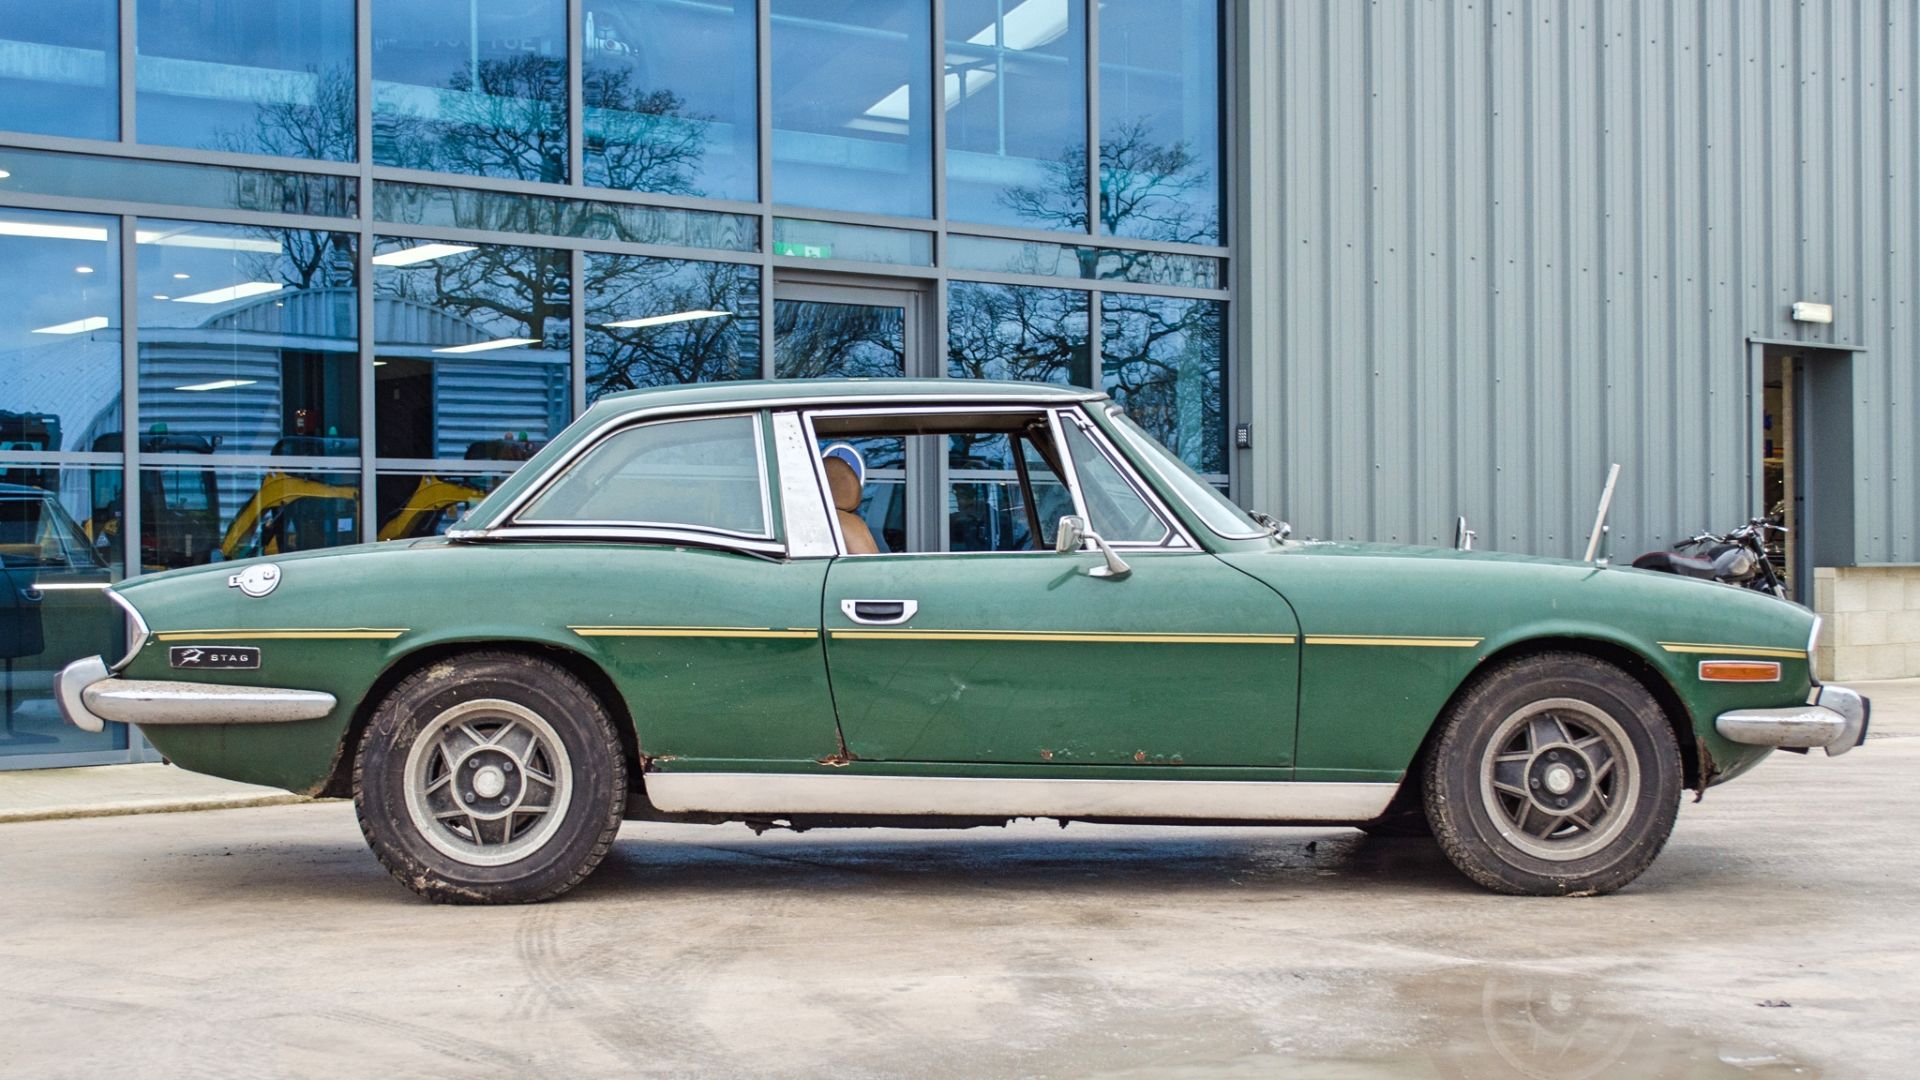 1978 Triumph Stag 3 litre manual 2 door convertible Barn Find - Image 15 of 57